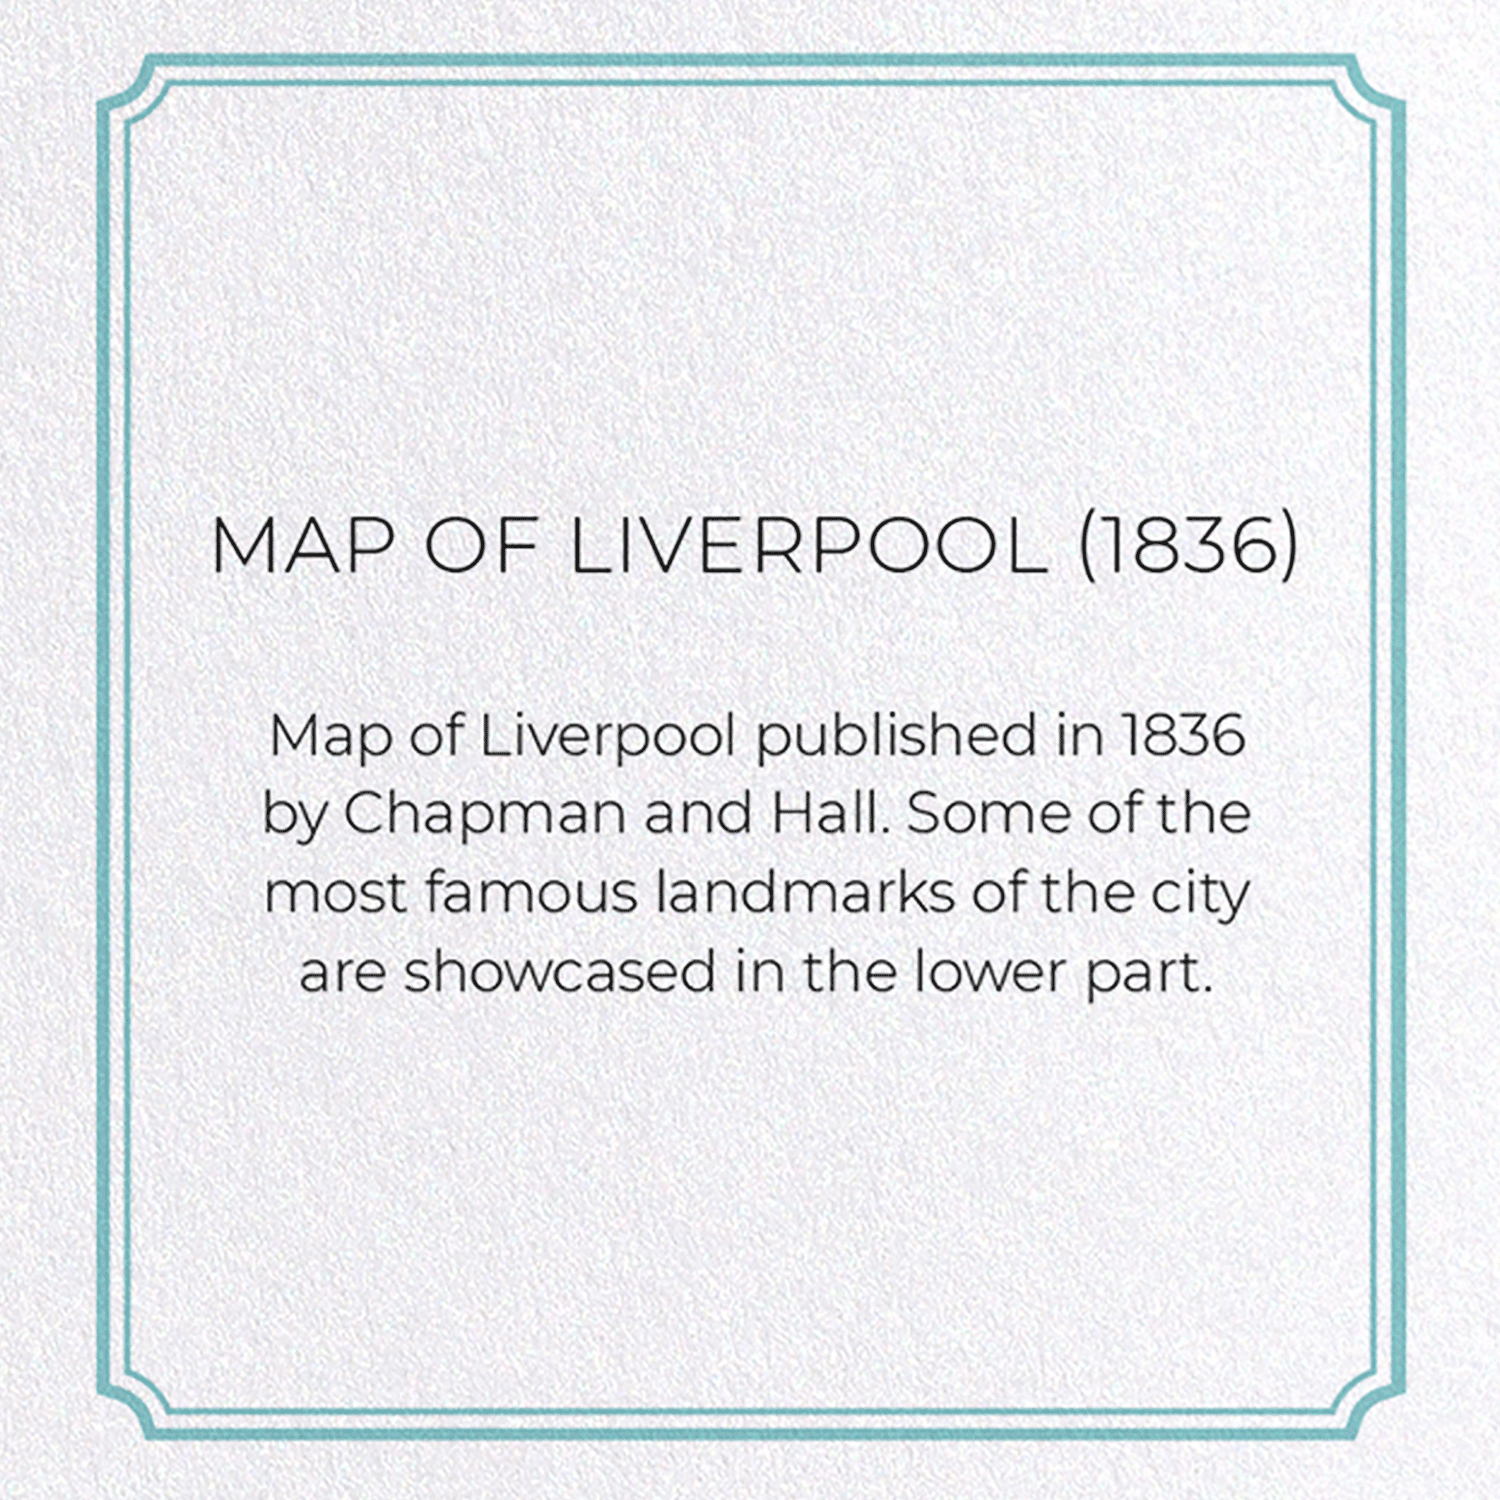 MAP OF LIVERPOOL (1836): Map antique Greeting Card